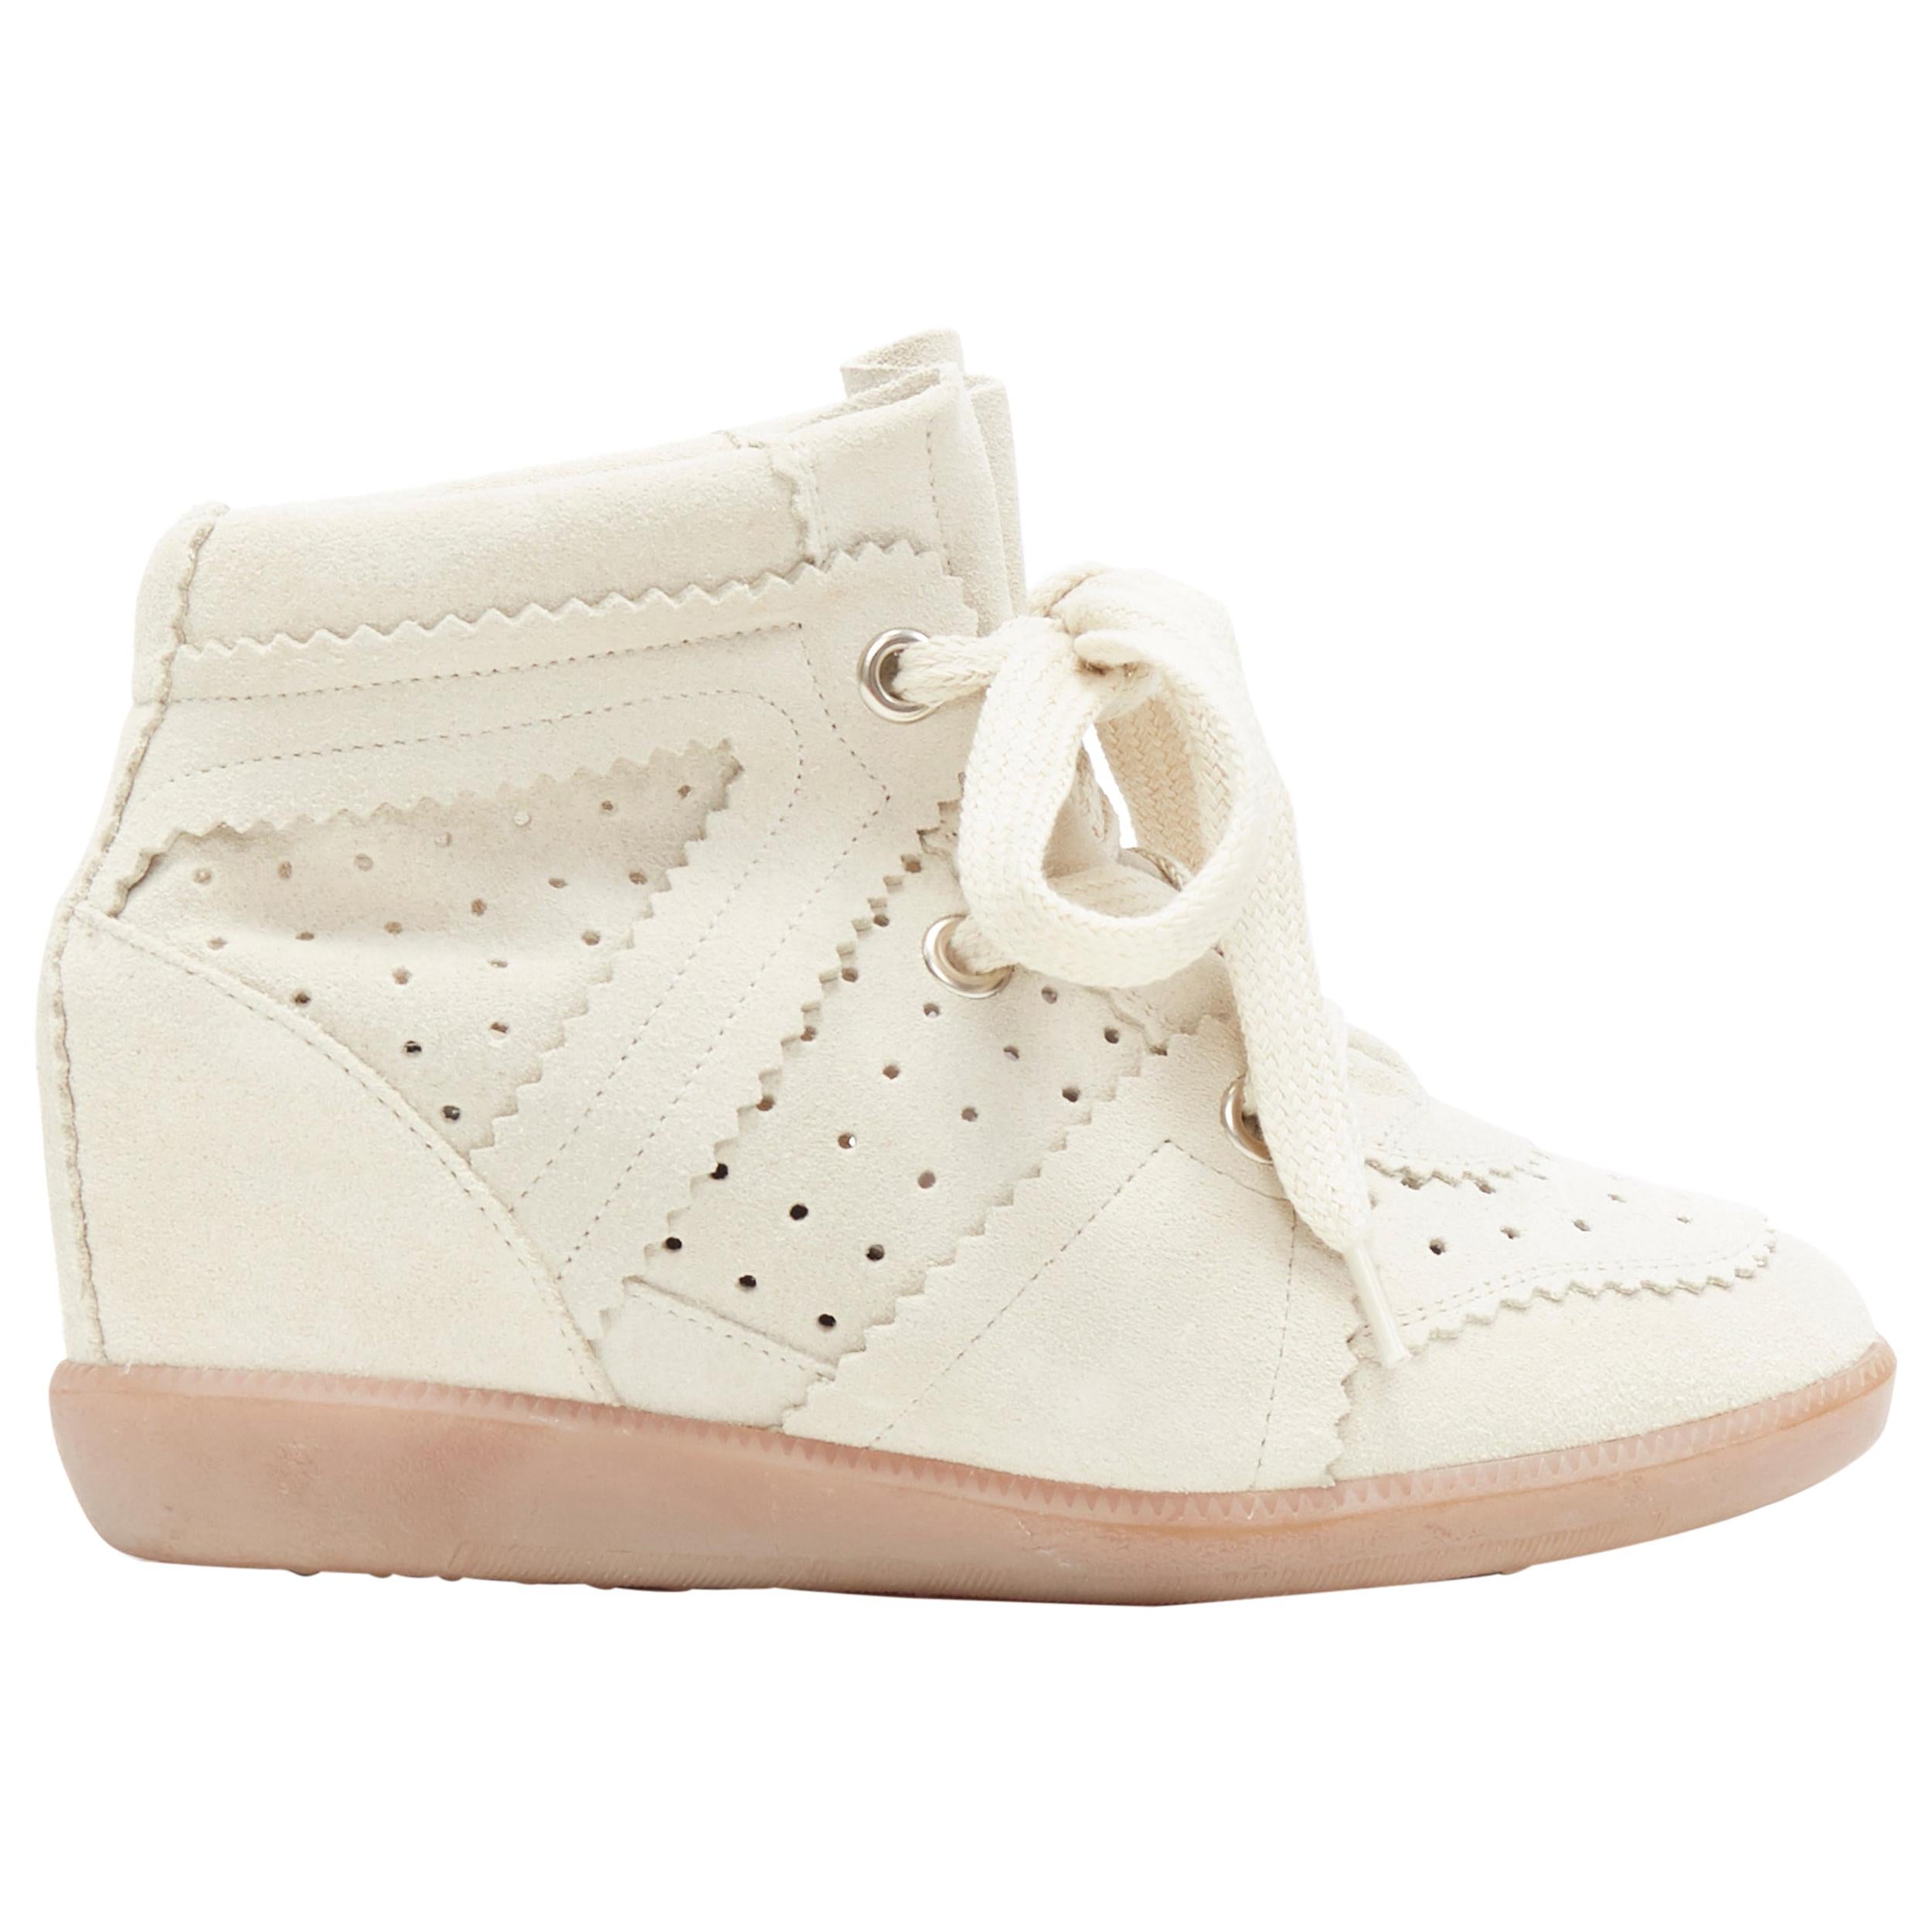 new ISABEL MARANT Bobby Chalk beige suede lace up concealed wedge sneaker EU38